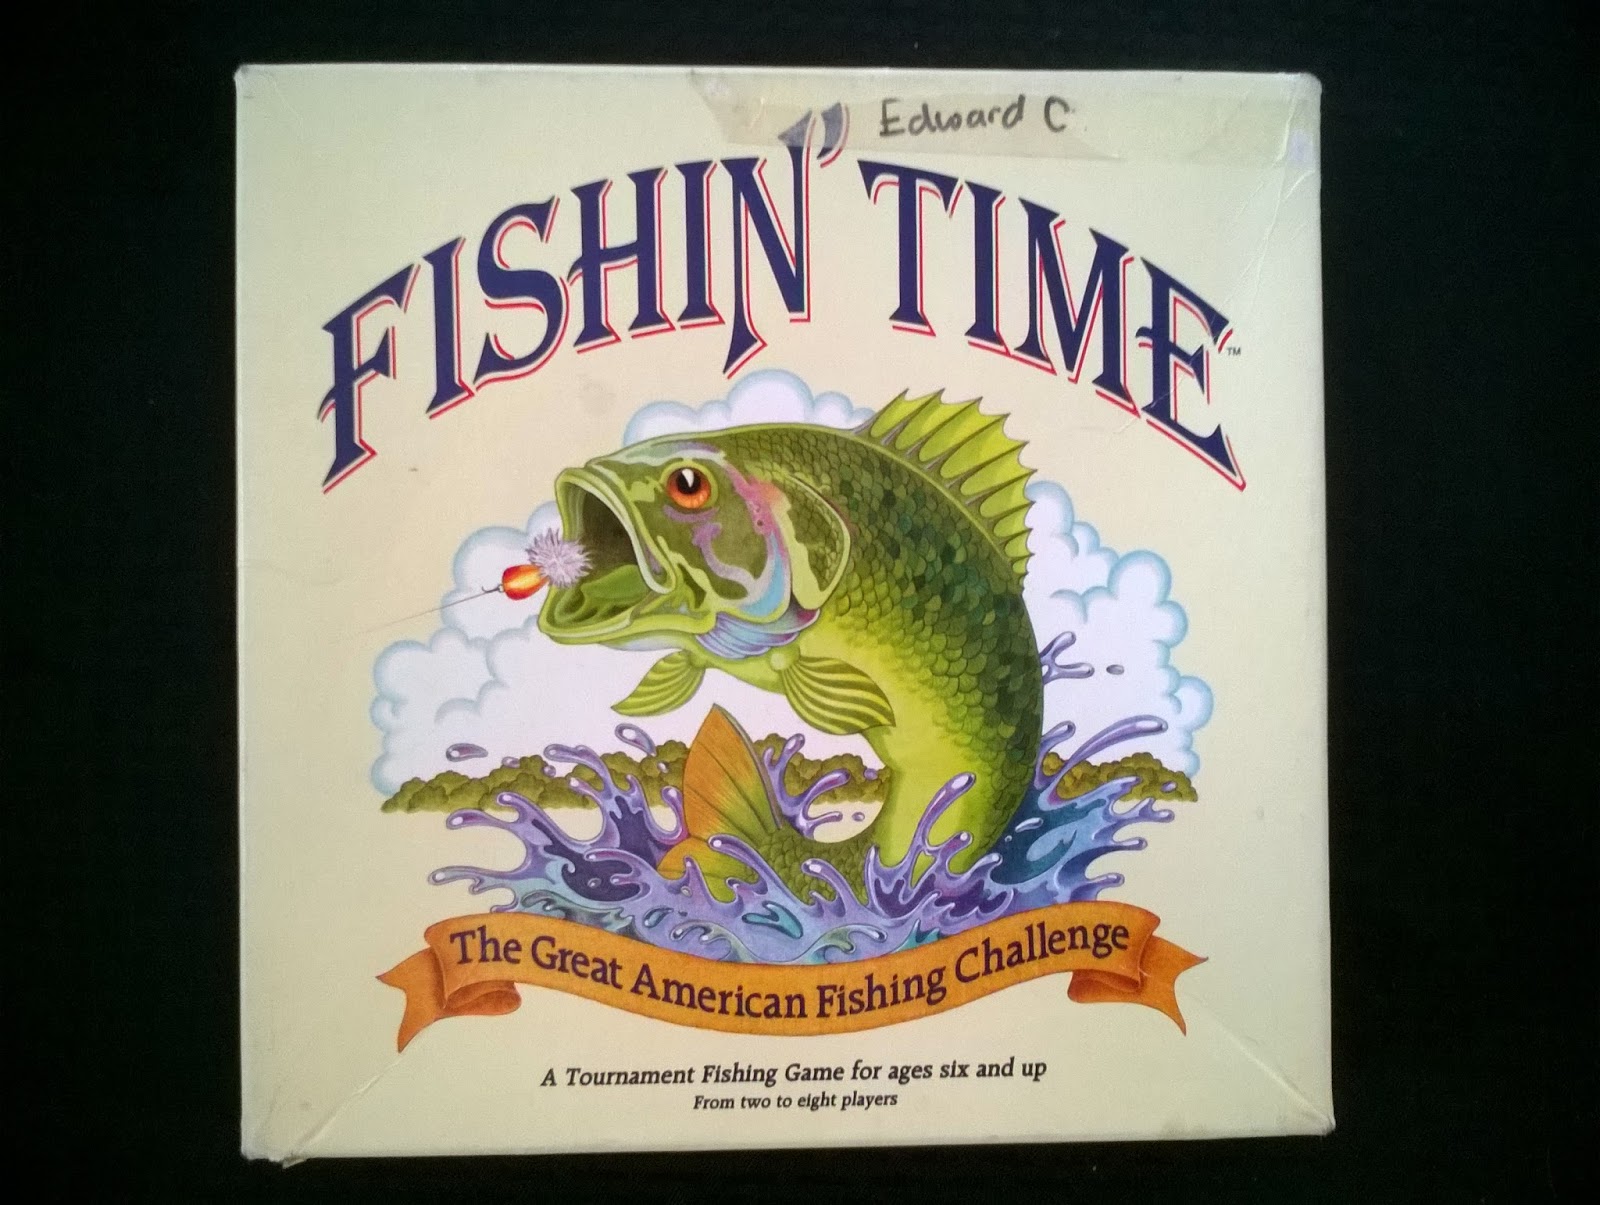 A Board Game A Day: Fishin' Time